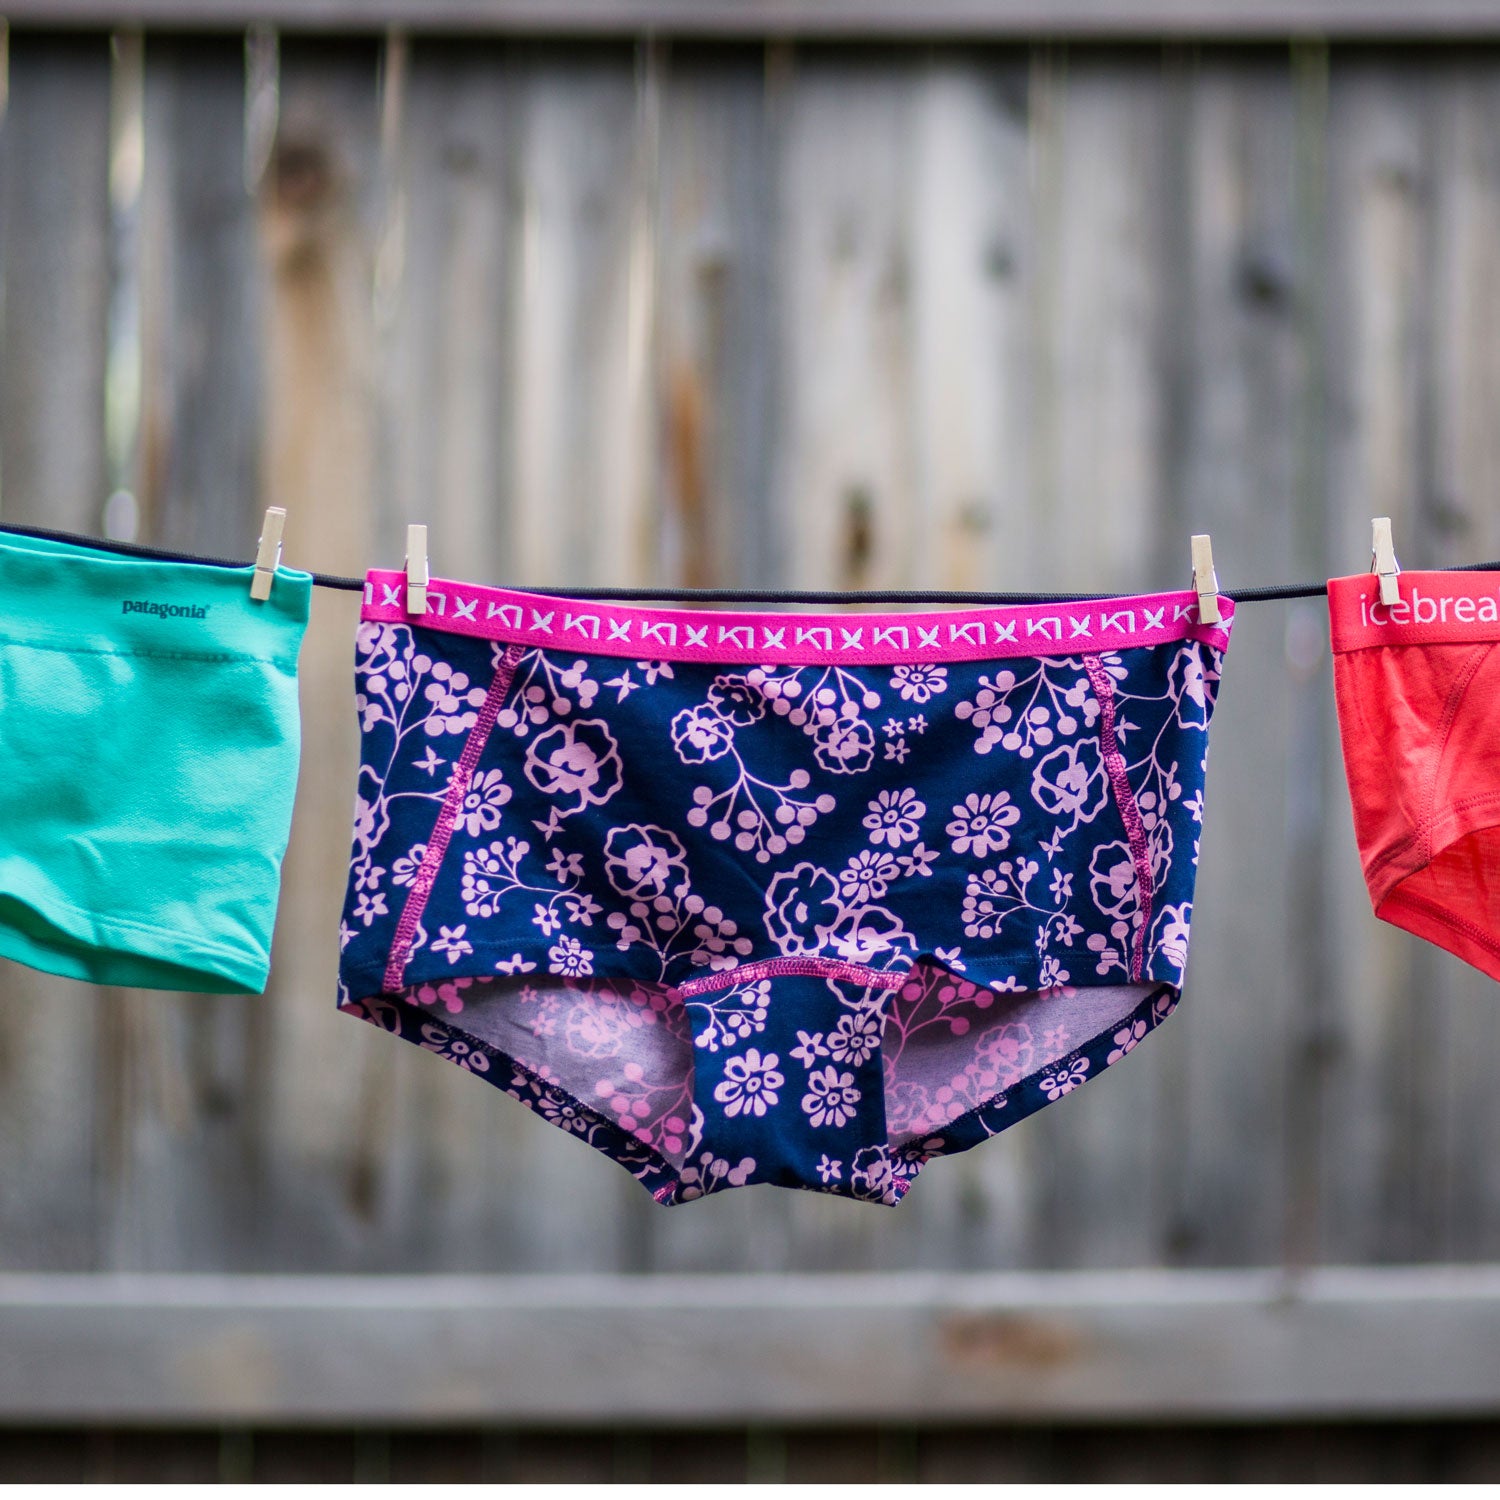 How To Wear a Thong? A Guide To Comfort - Blog